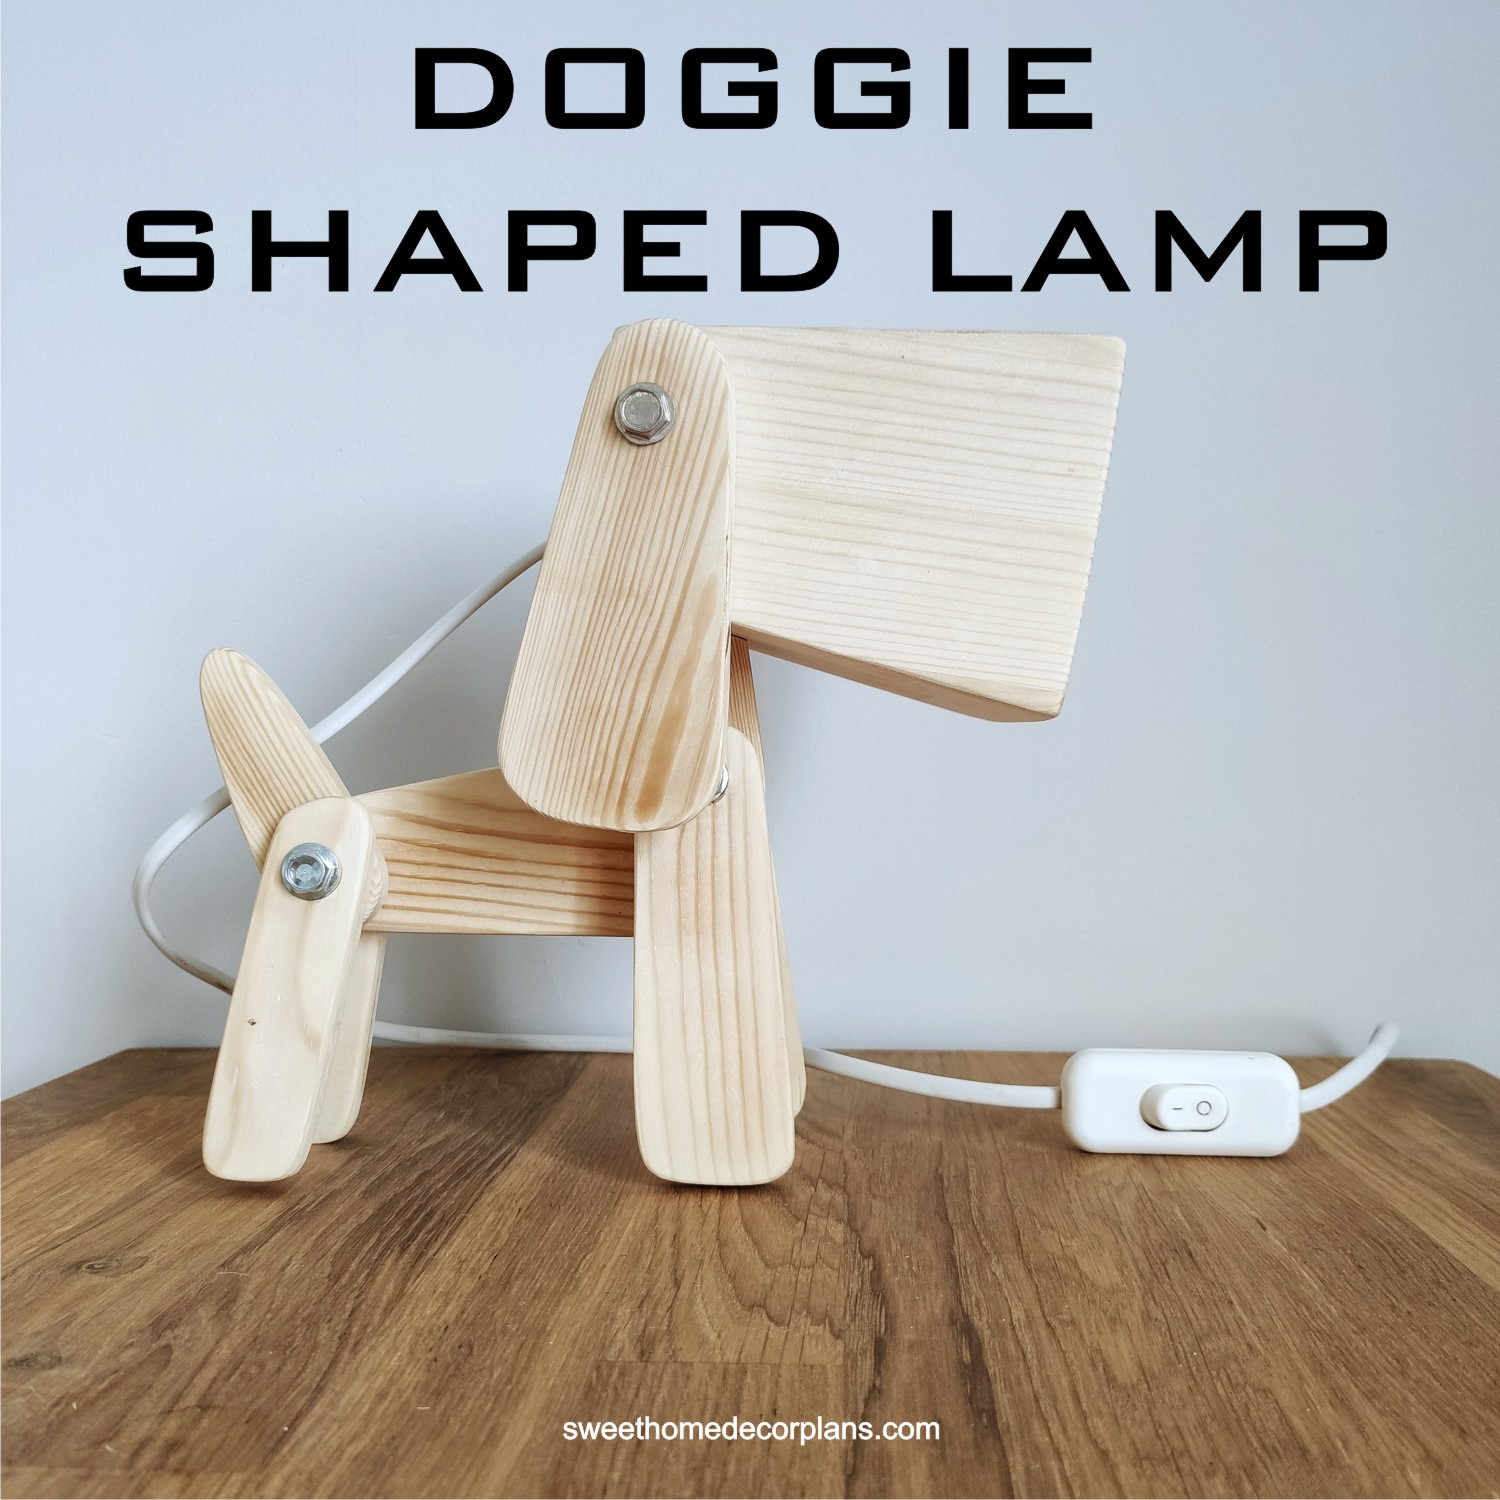 wooden-doggie-shaped-lamp-diy-project